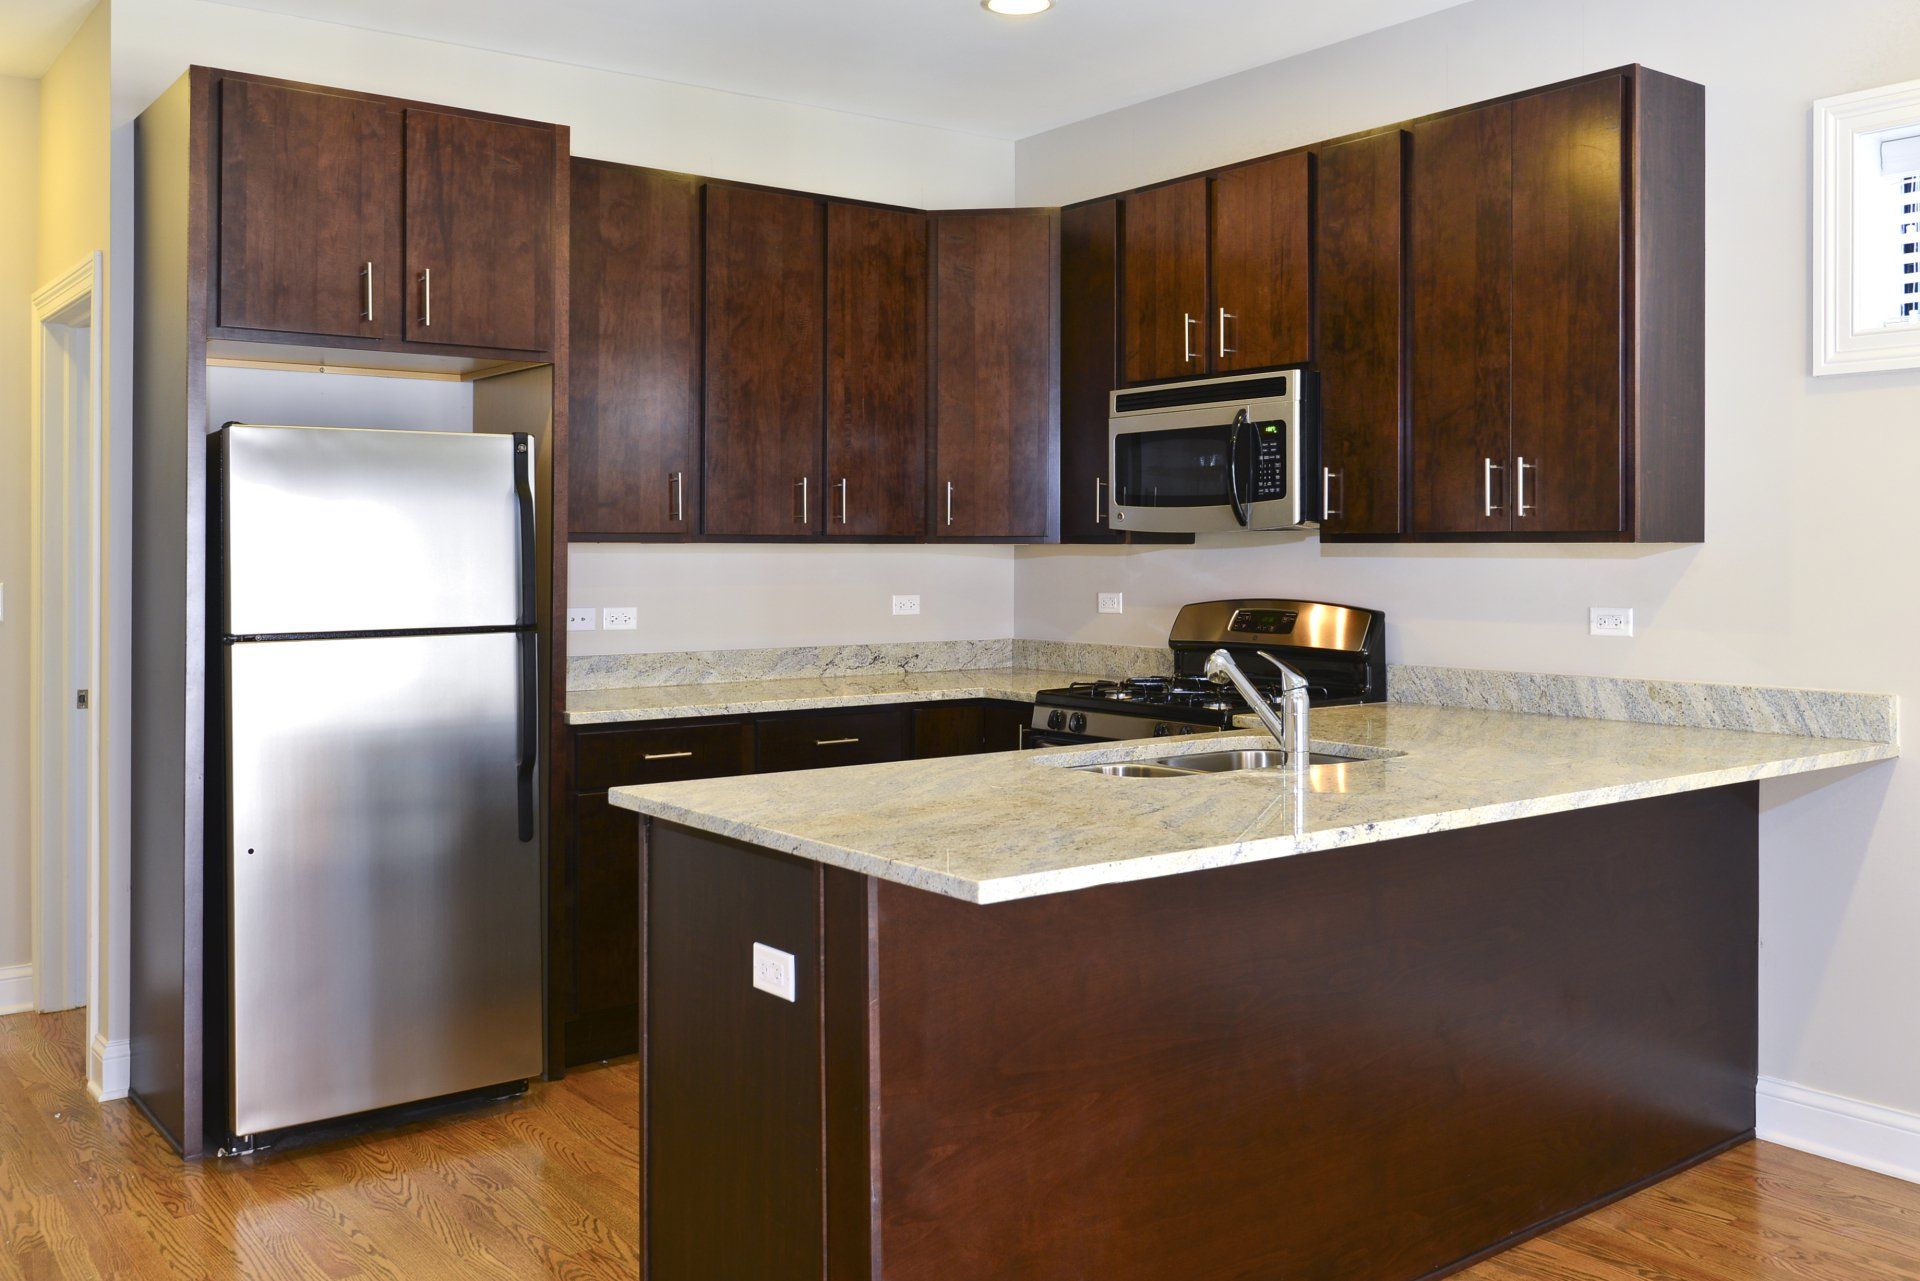 A kitchen with stainless steel appliances, oversized breakfast bar, and wooden cabinets at The Belmont by Reside Flats.